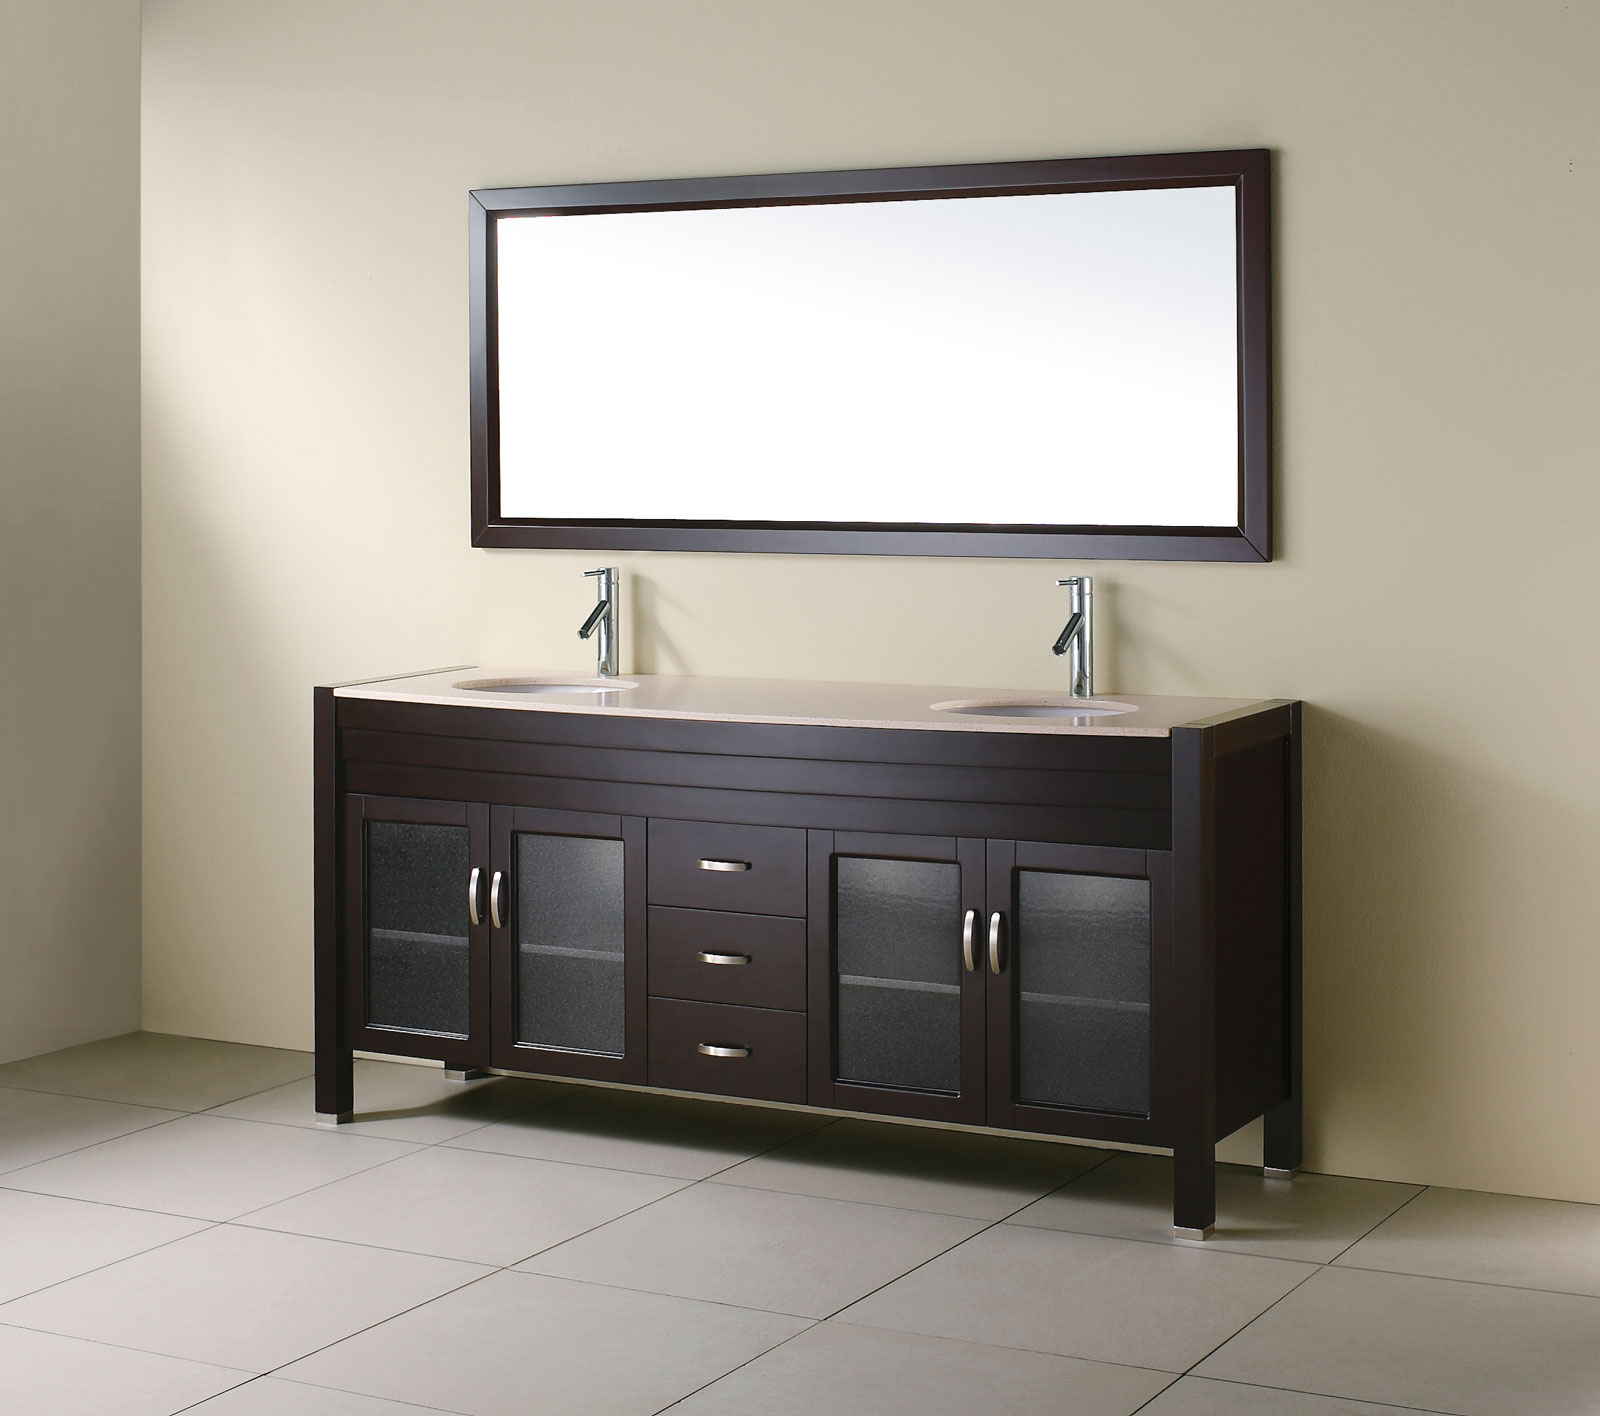 Minimalist Bathroom Bathroom Fascinating Minimalist Bathroom With Elongated Bathroom Vanity Cabinets In Dark Brown Color Ideas Coupled By Double Sinks And Furnished With Mirror Bathroom 15 Bathroom Vanity Cabinets For Your Captivating Home